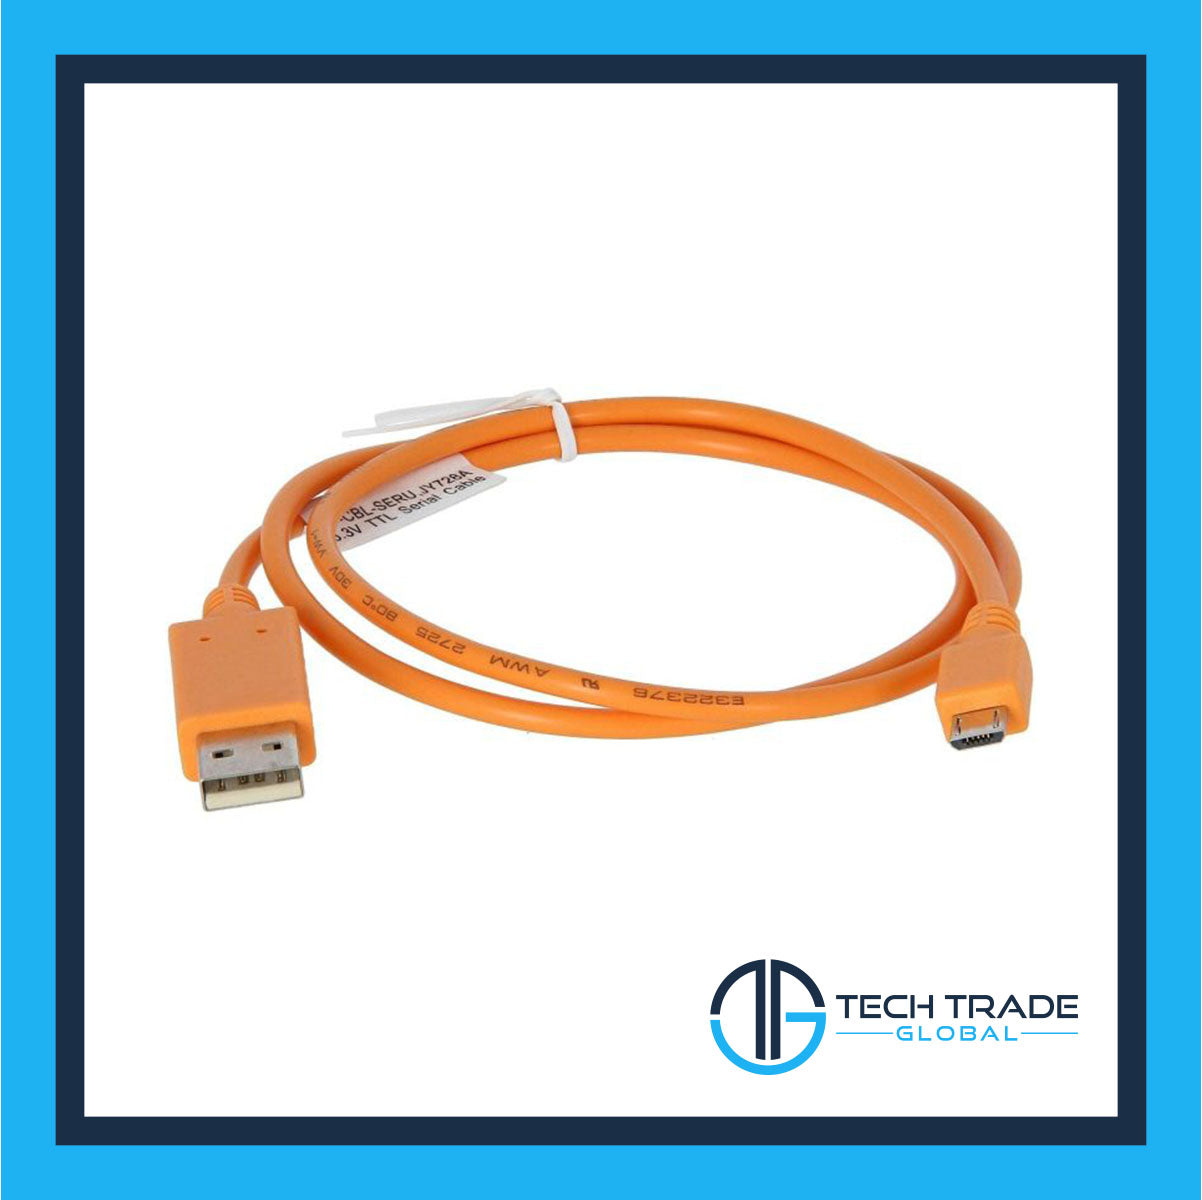 JY728A | HPE Aruba Micro-USB 2.0 Console Adapter Cable - USB / serial cable - TTL serial to USB